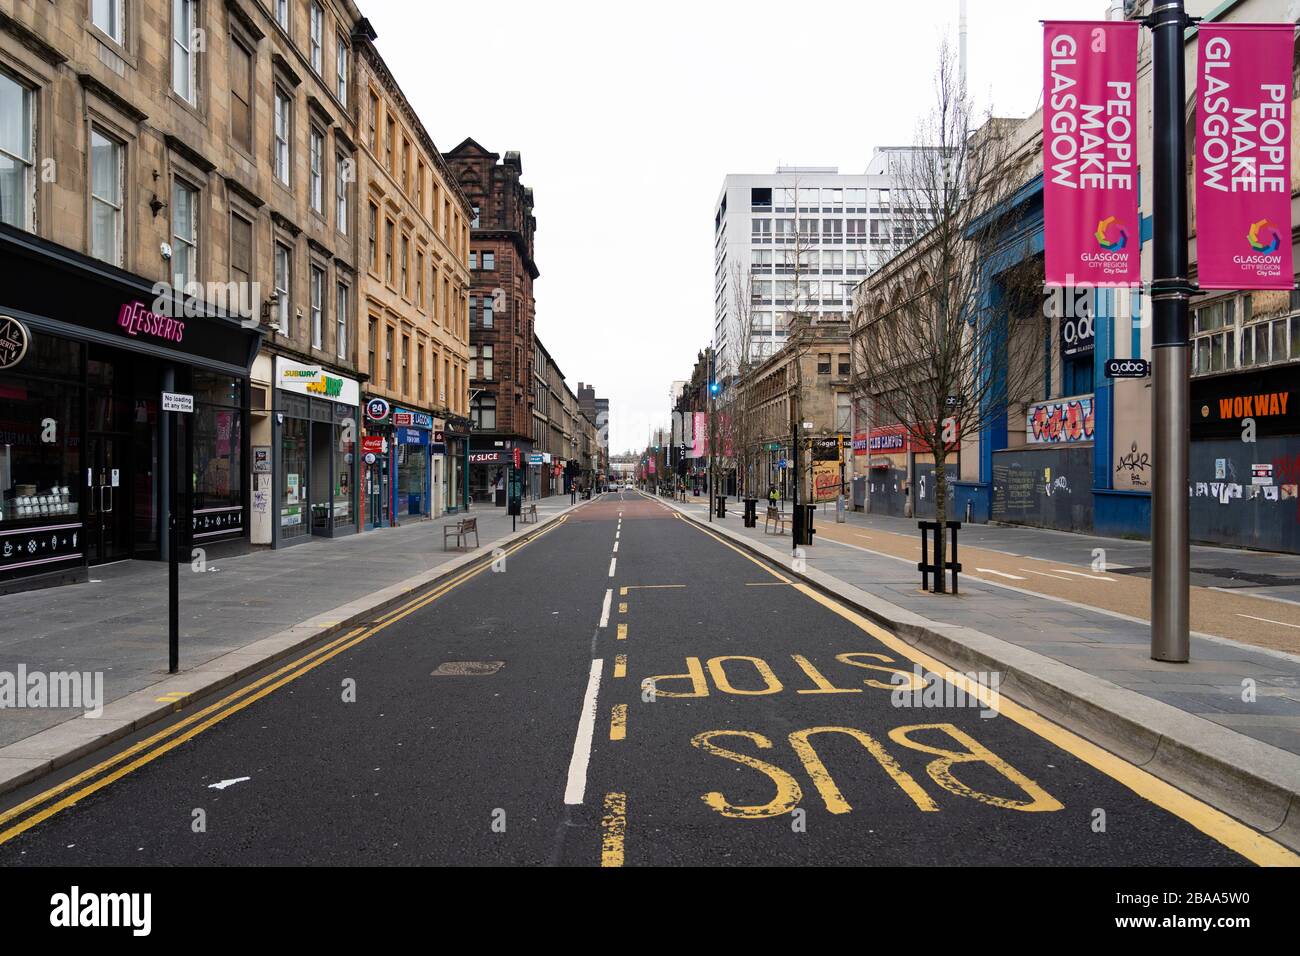 Glasgow, Scotland, UK. 26 March, 2020. Views from city centre in Glasgow on Thursday during the third day of the Government sanctioned Covid-19 lockdown. The city is largely deserted. Only food and convenience stores open. Pictured; Sauchiehall Street is virtually deserted.Iain Masterton/Alamy Live News Stock Photo